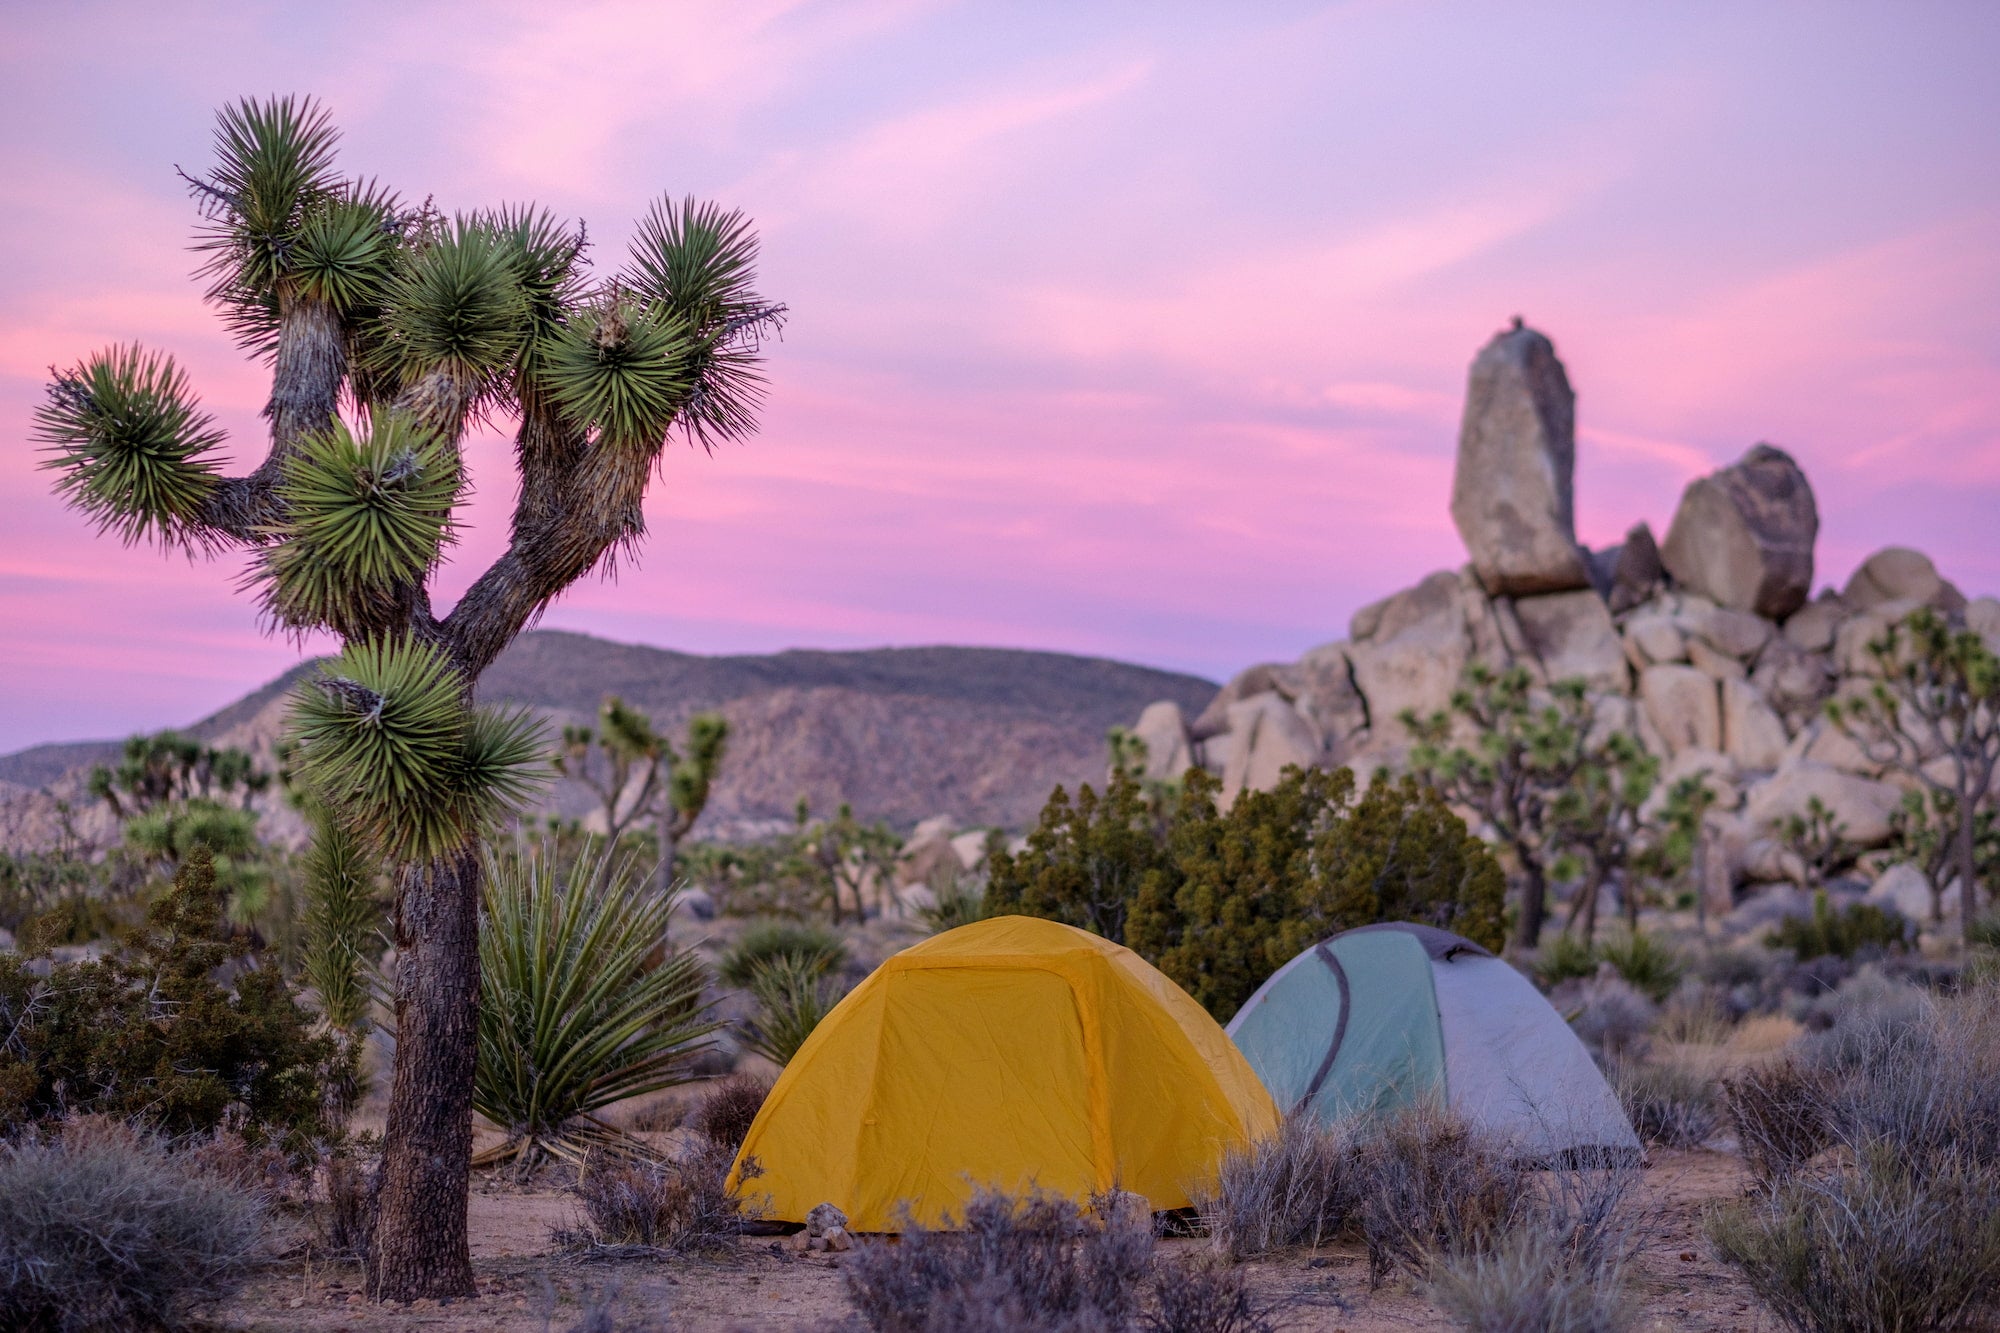 How to find free camping on the west coast